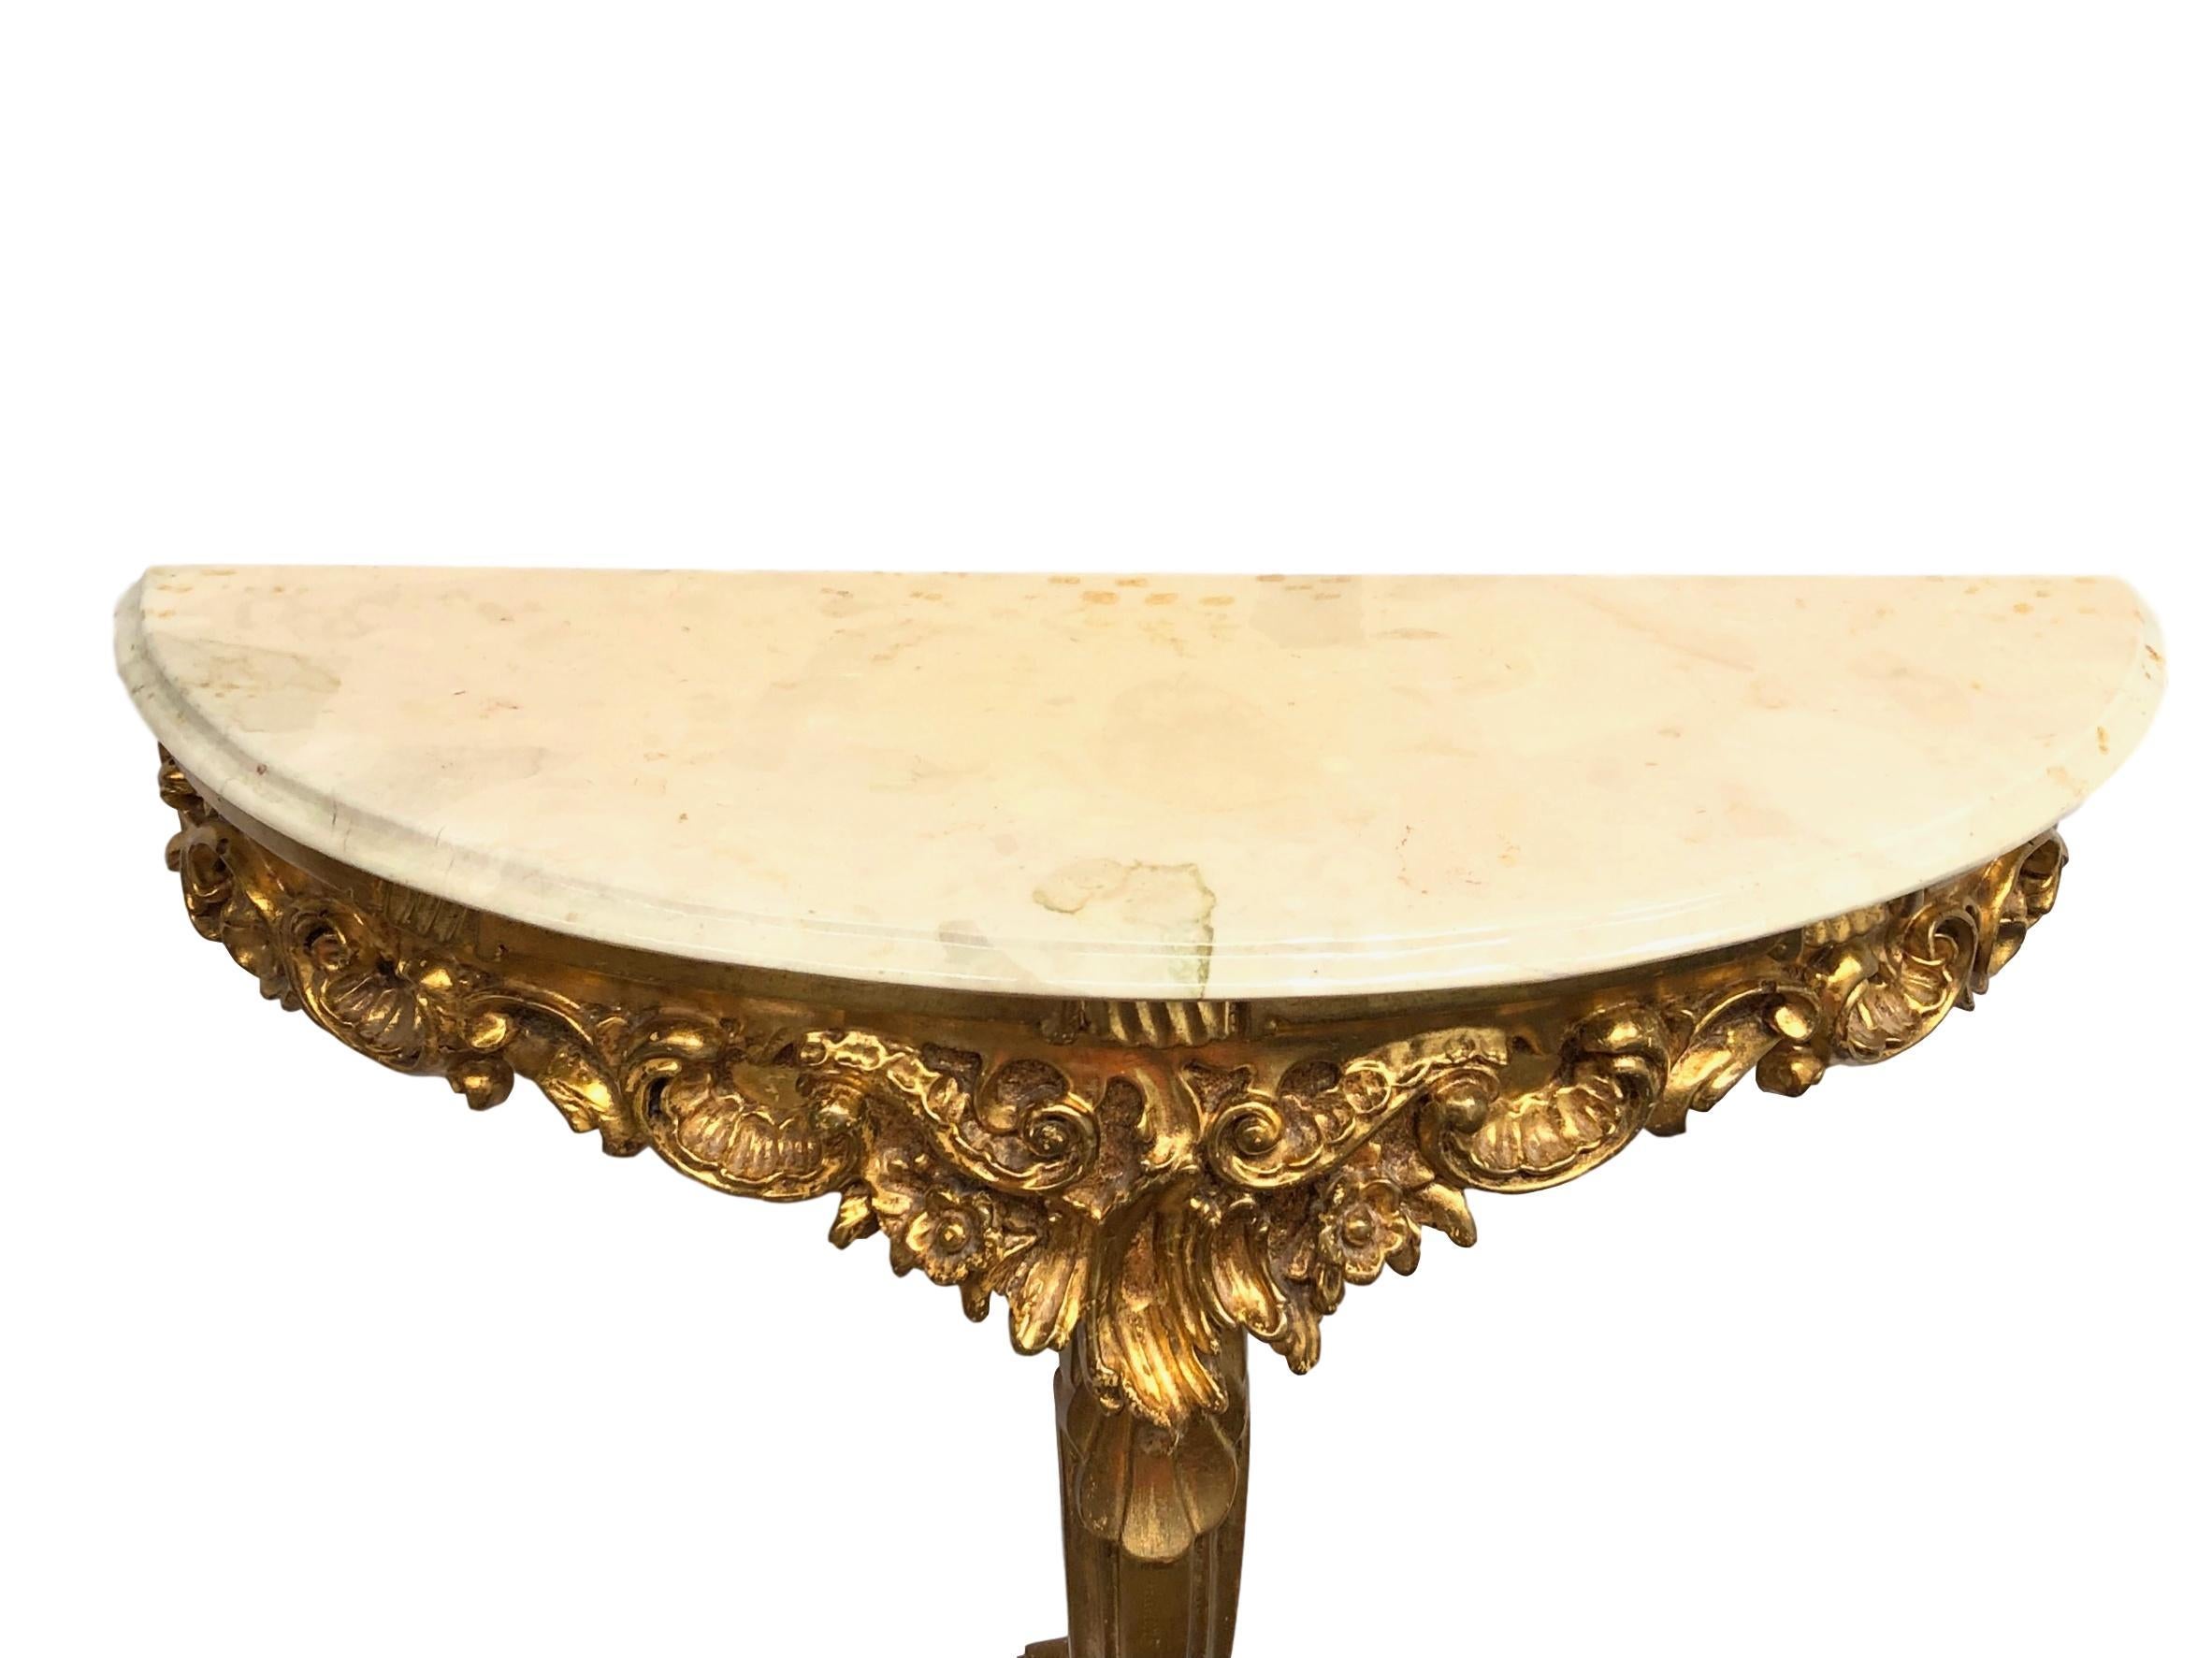 Wood Gilded Toleware Wall Mount Console Hollywood Regency Style, Marble Plate Vintage